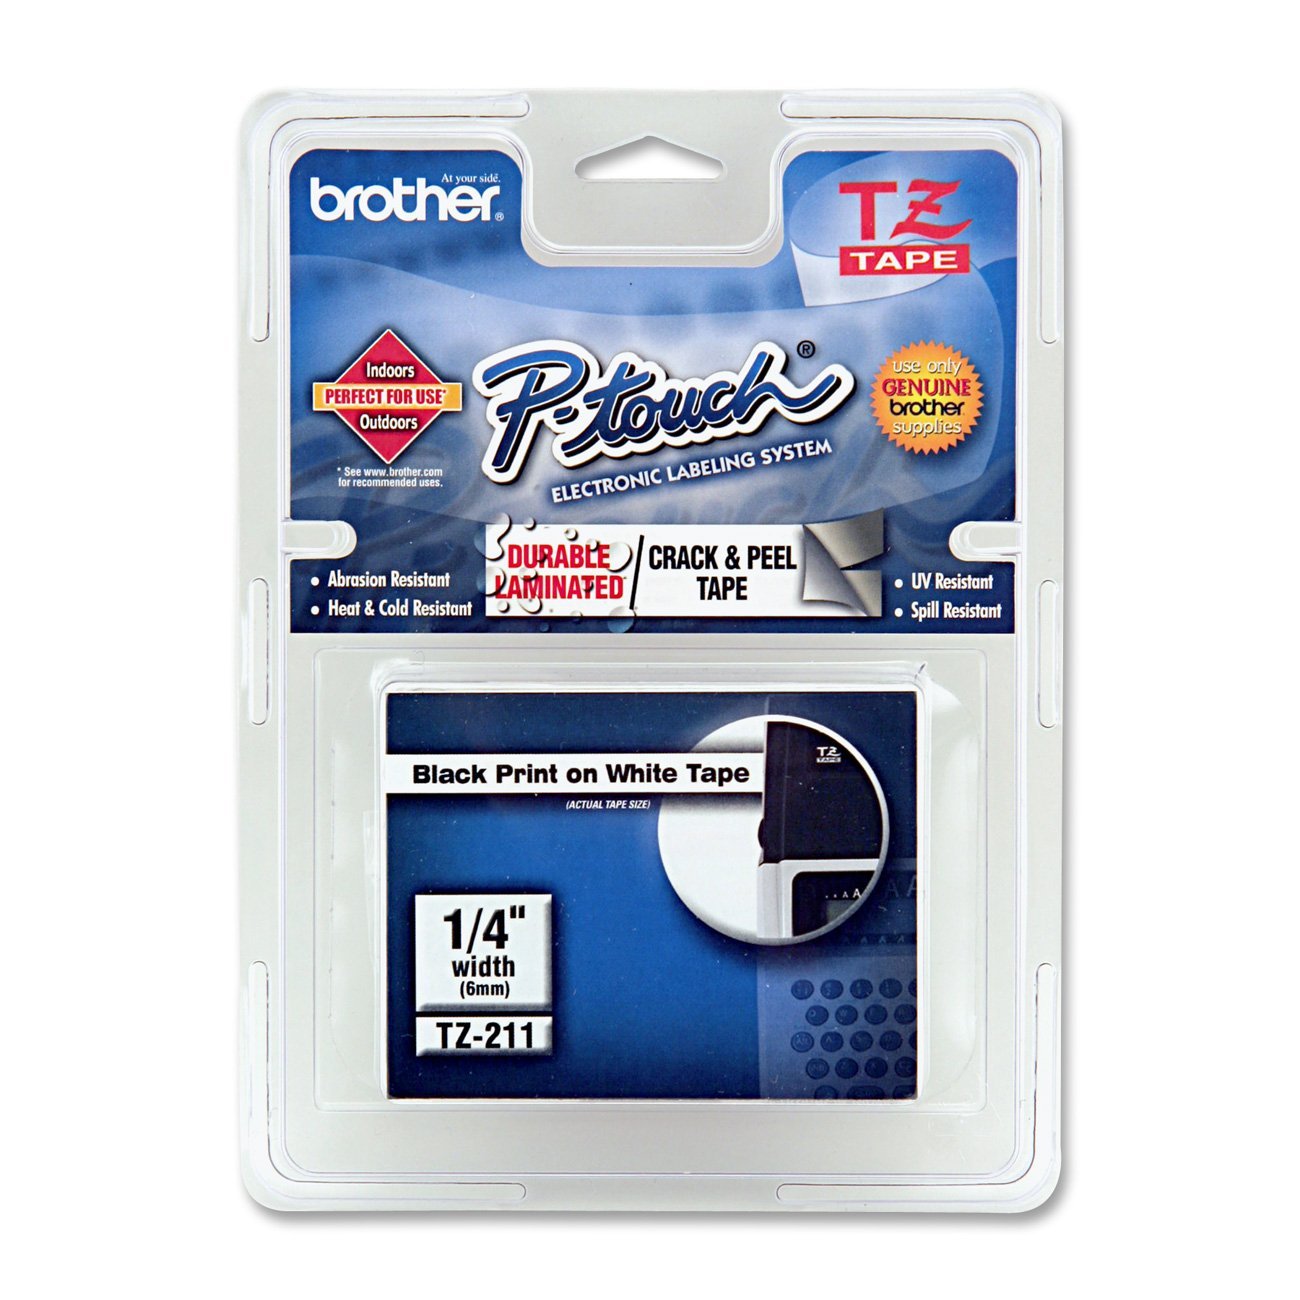 Brother TZE-211 1/4" Laminated Tape Black on White Label Tape